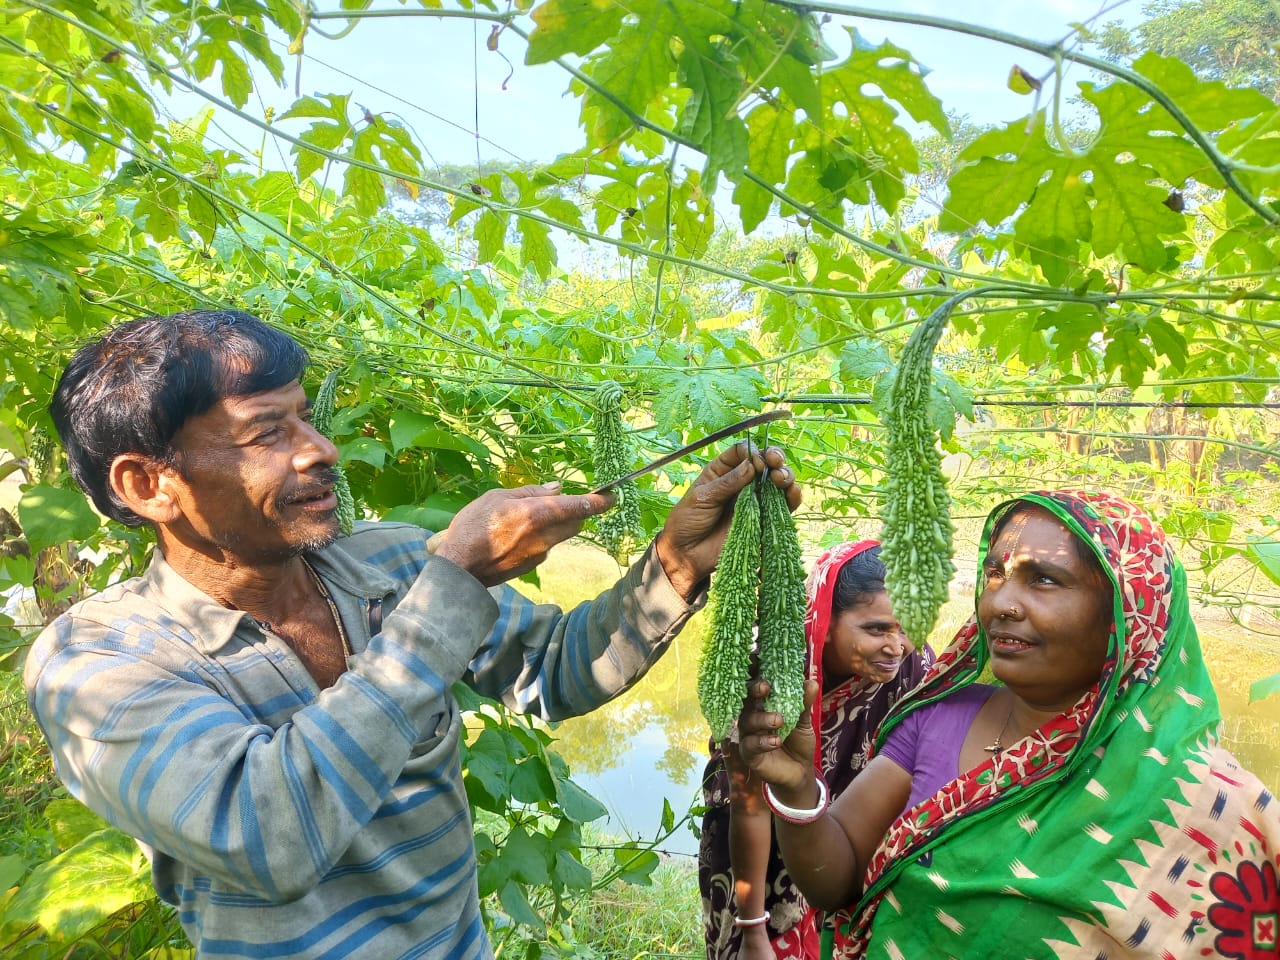 A male farmer in Bangladesh cuts ripe bitter gourd fruit from the plant while a female farmer holds the fruit.